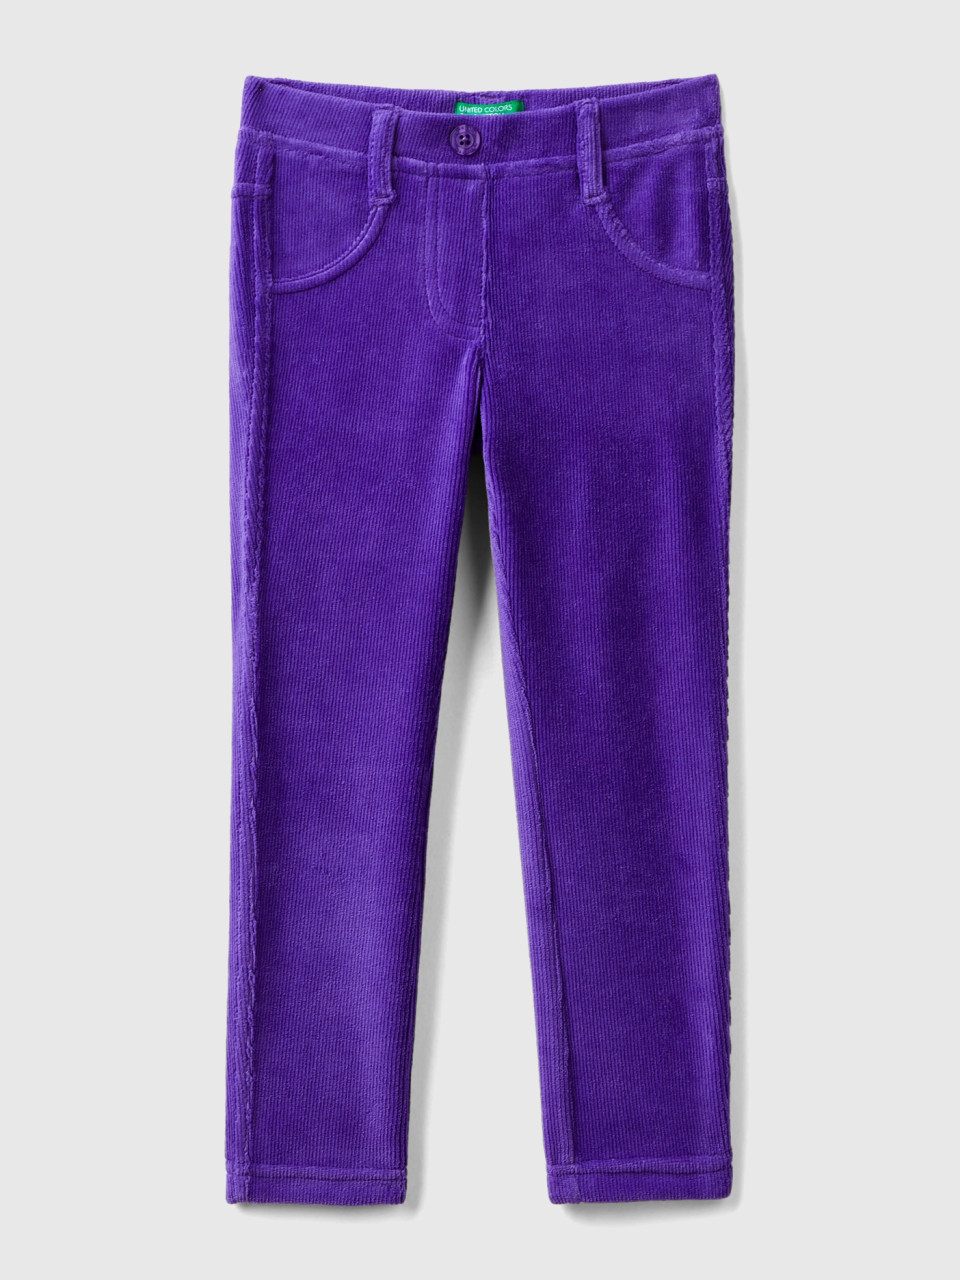 Benetton, Ribbed Chenille Trousers, Violet, Kids